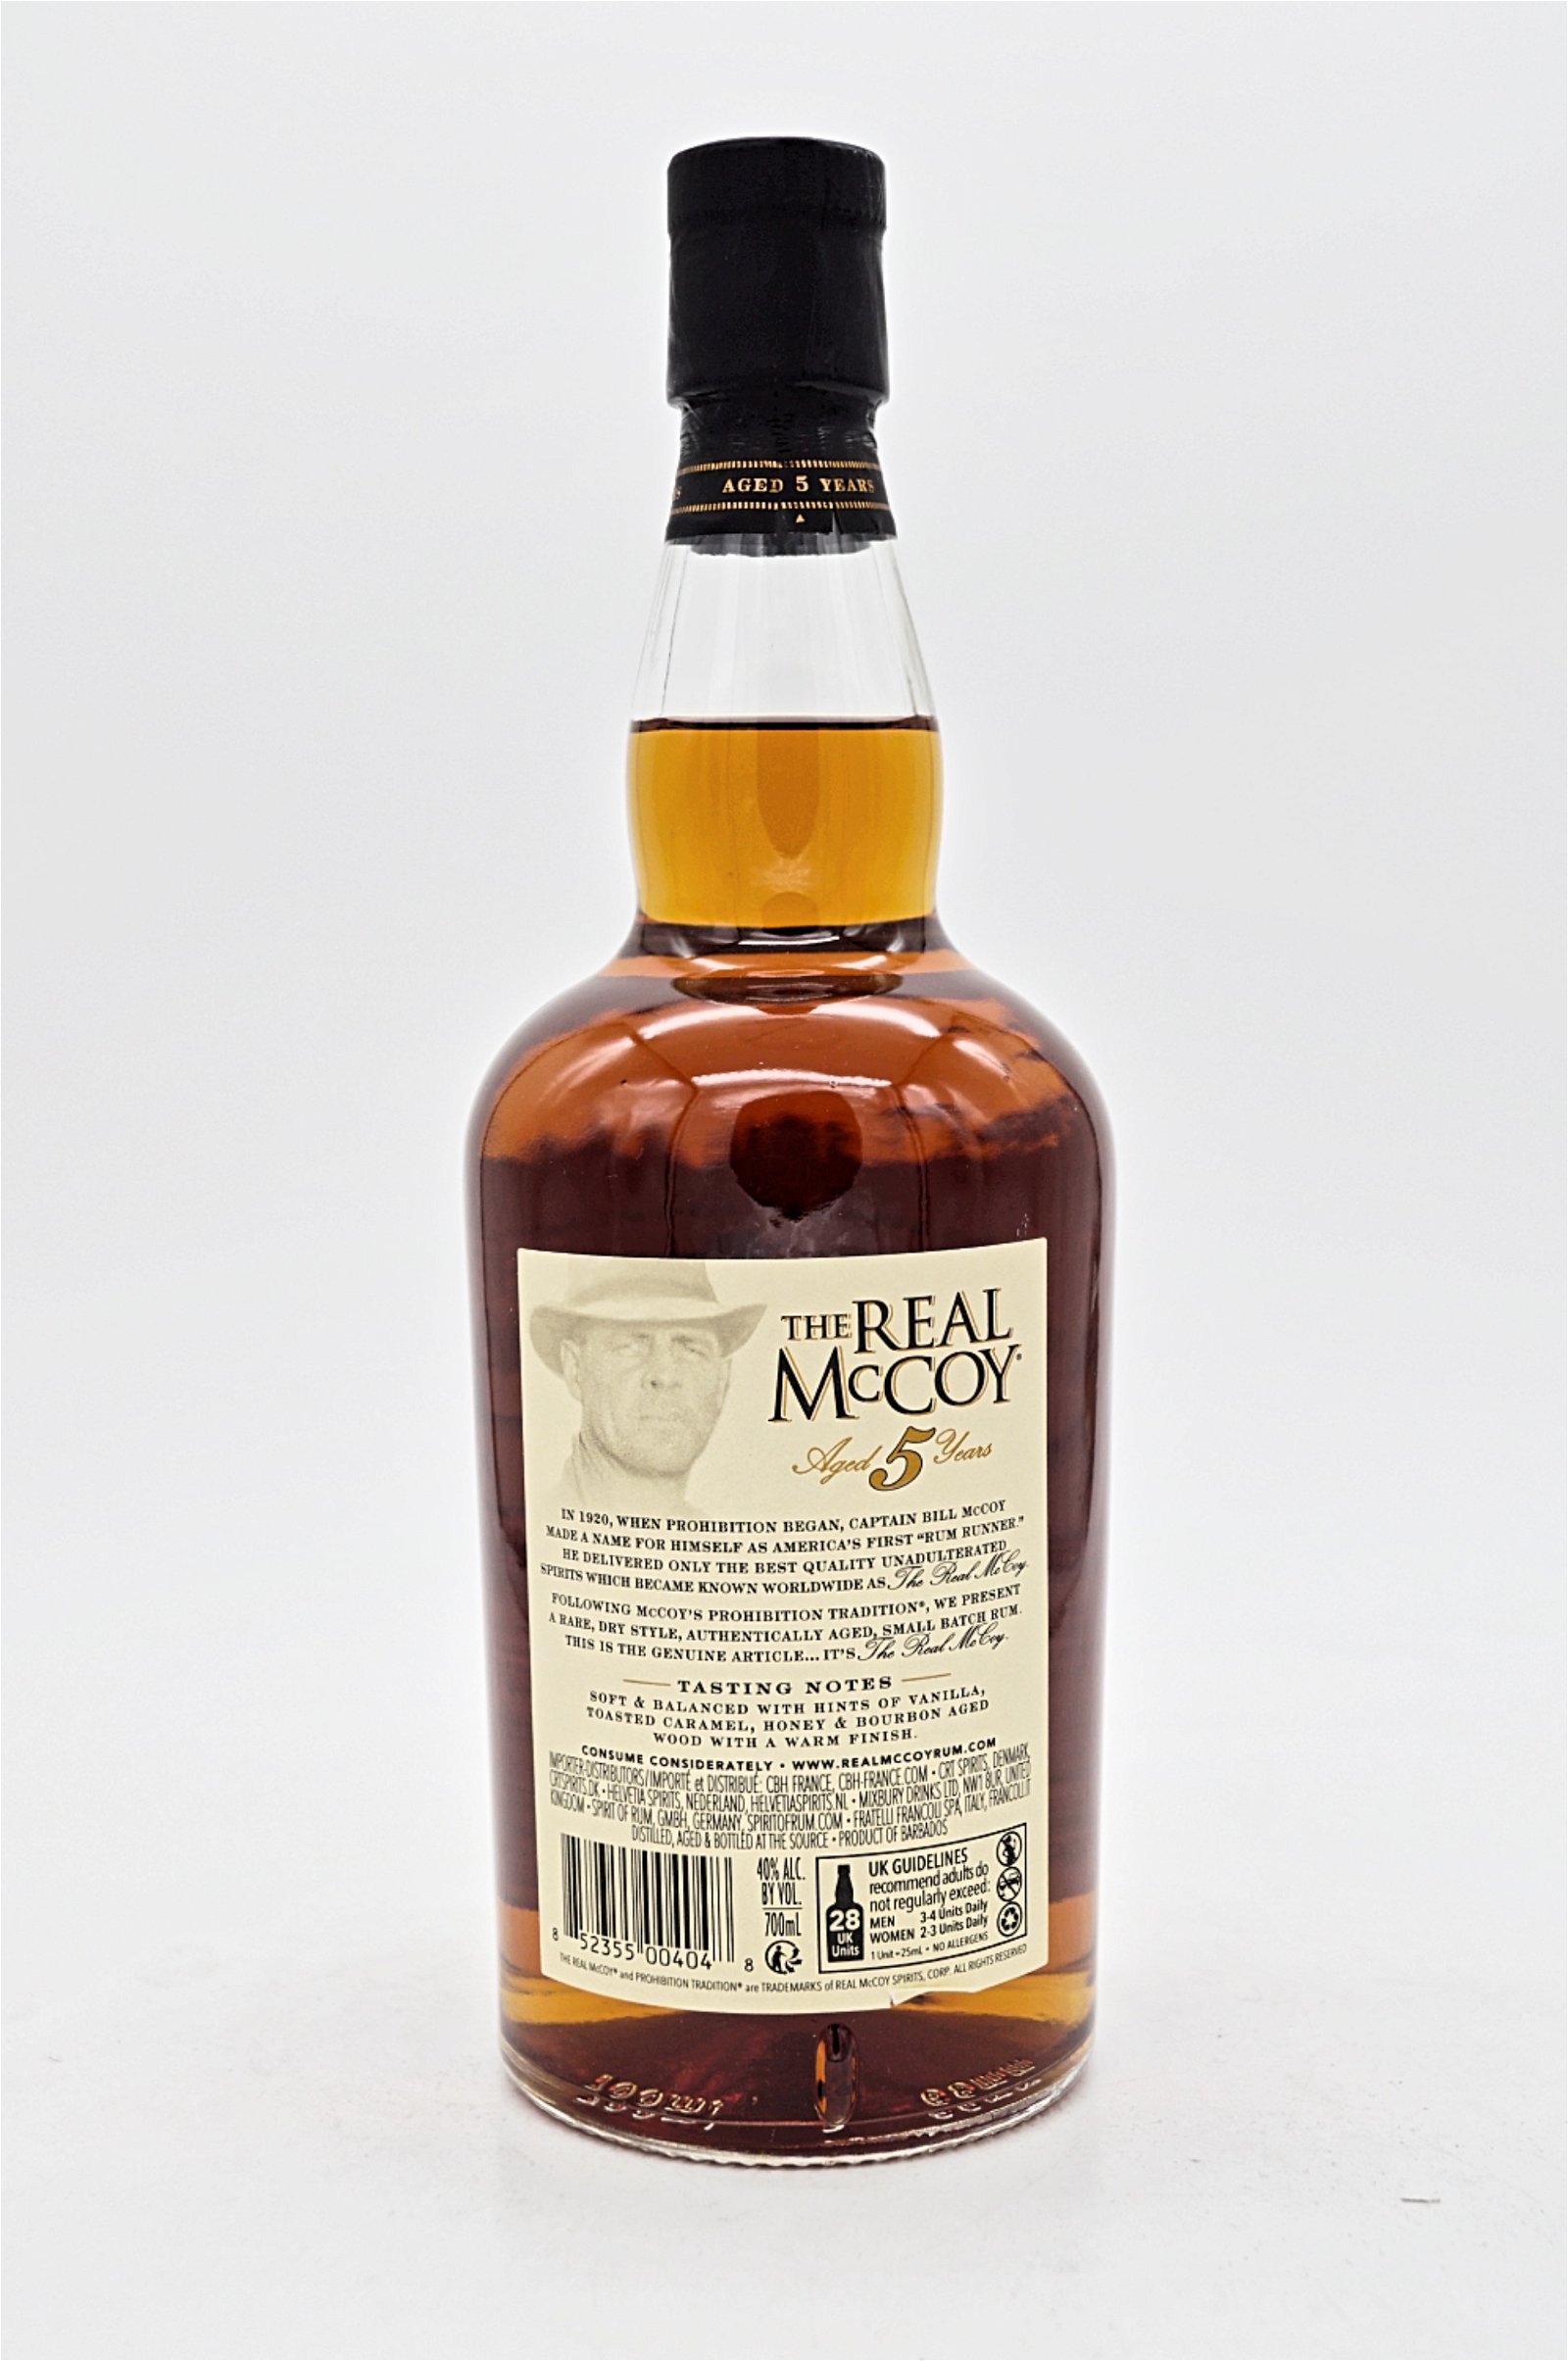 The Real McCoy 5 Jahre Single Blended Rum